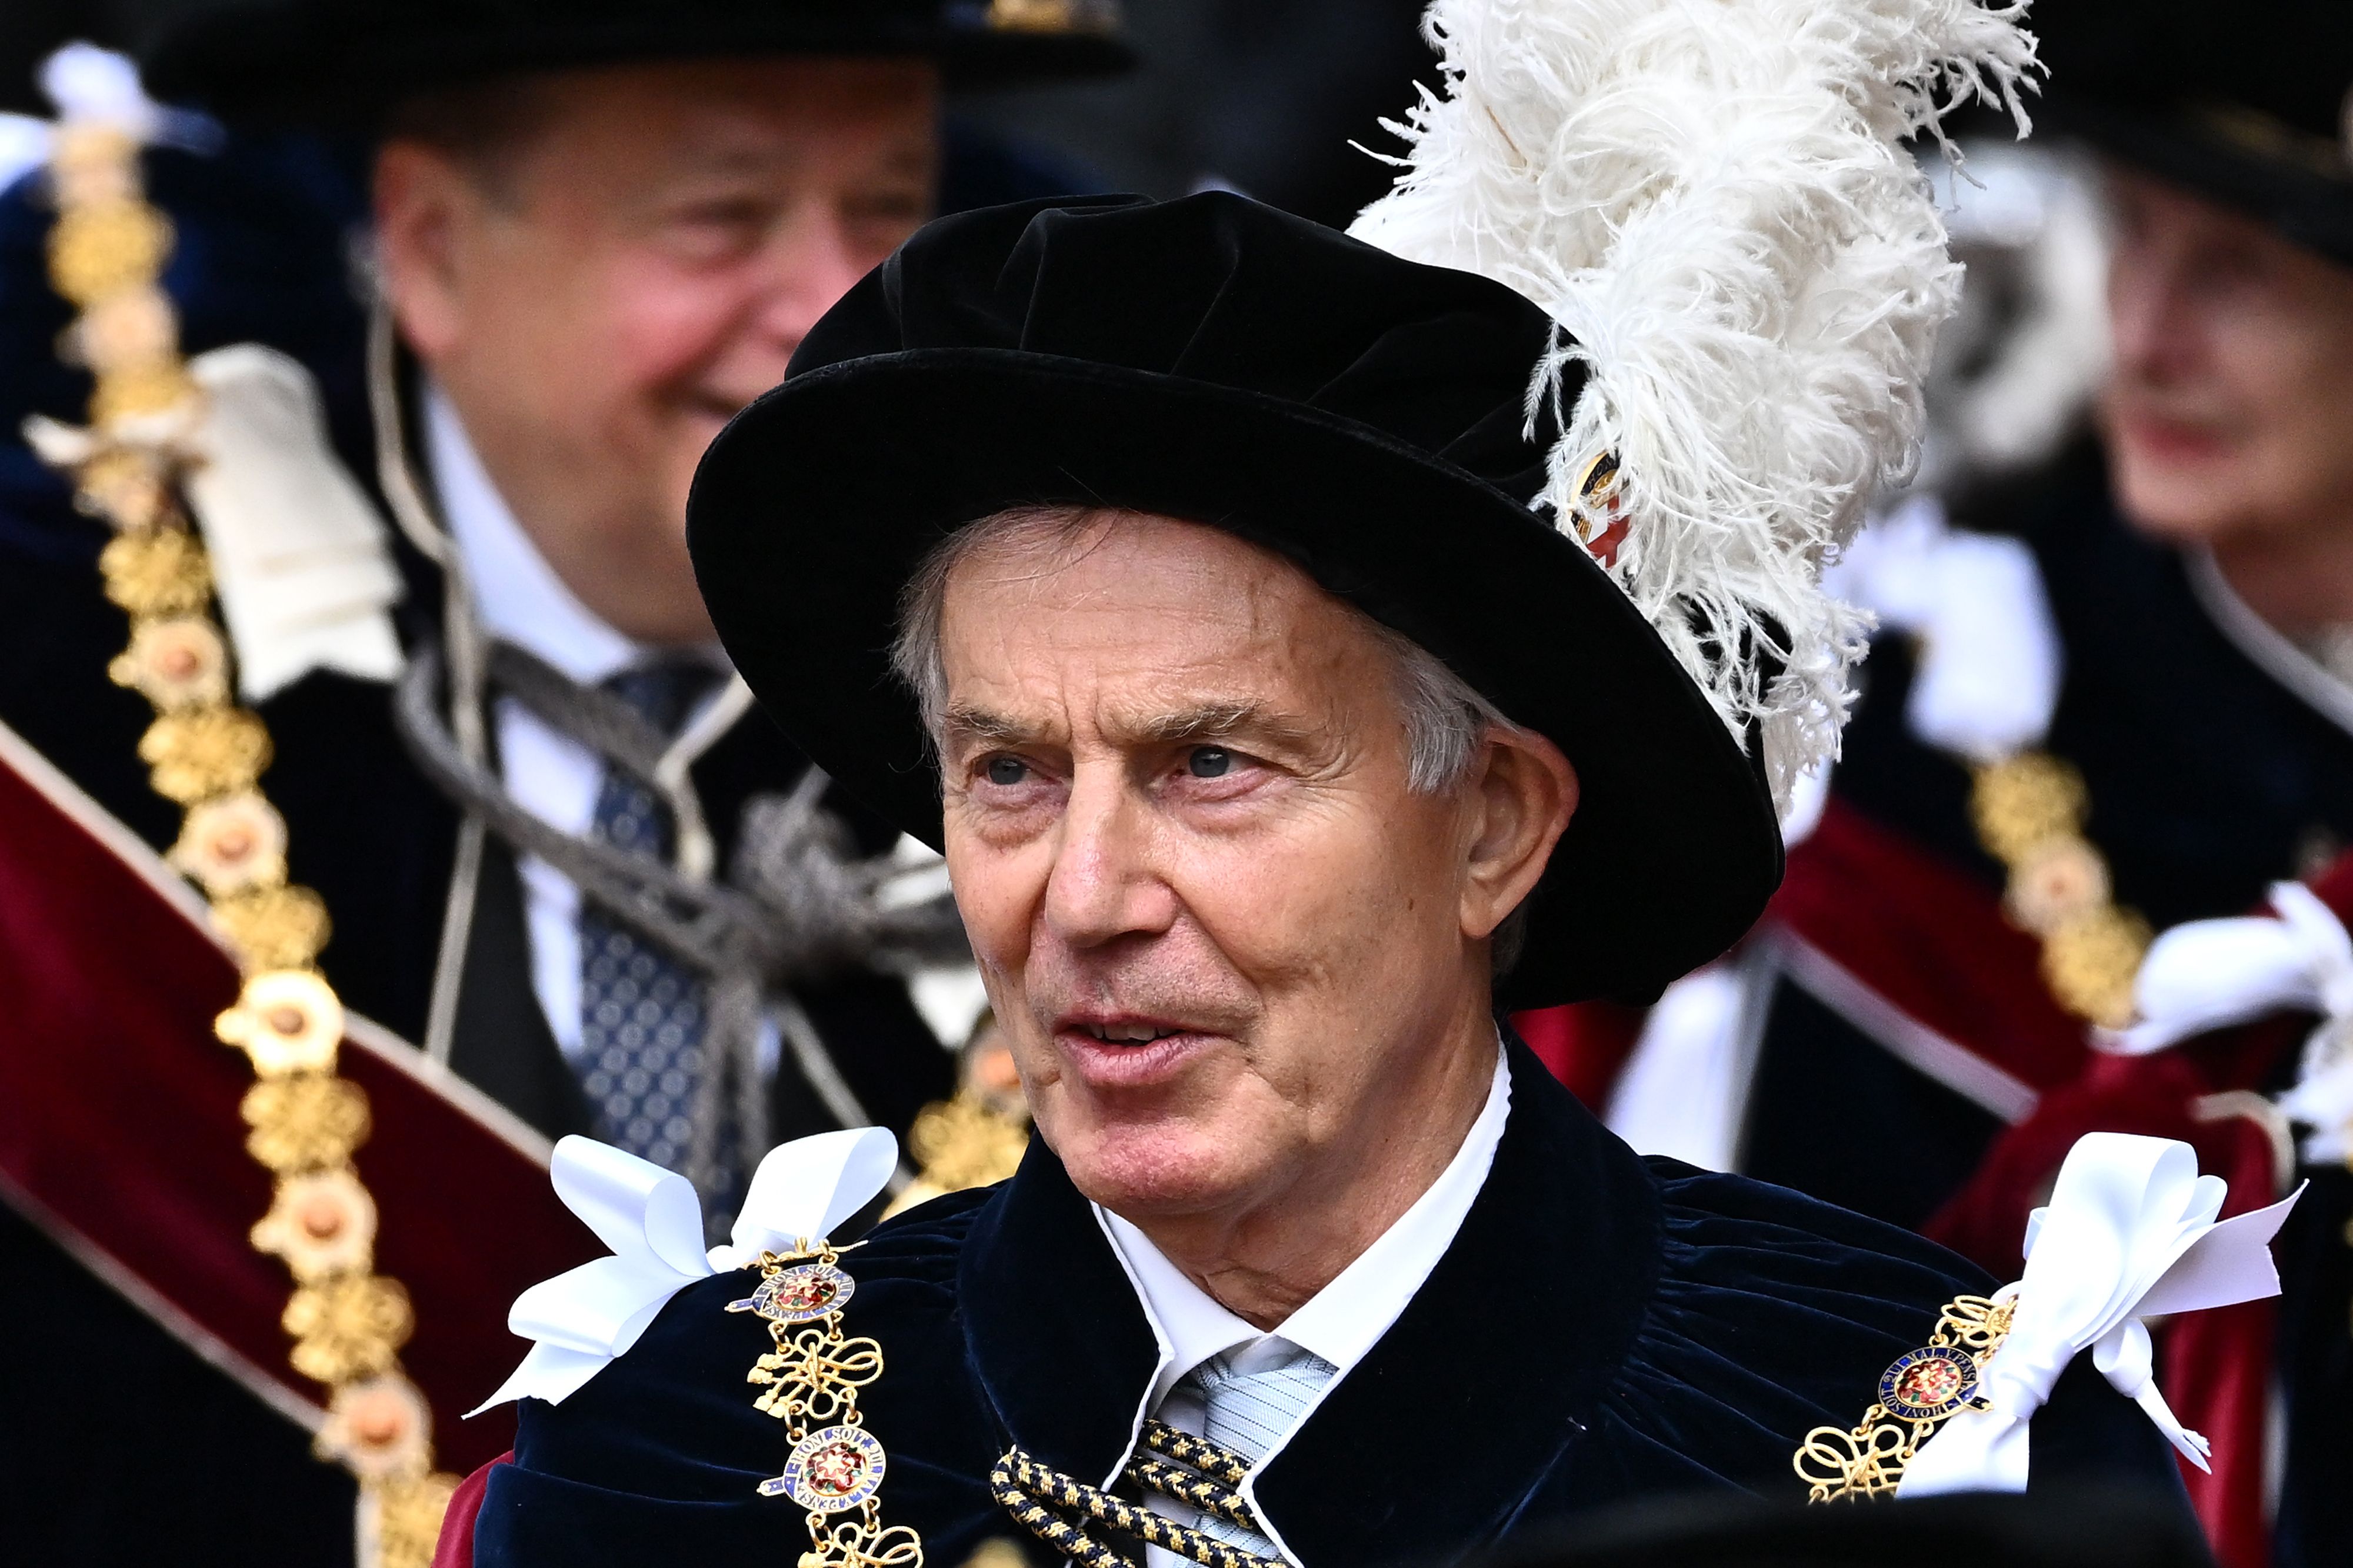 Former Prime Minister Tony Blair arrives for the annual Order of the Garter Service at St George's Chapel, Windsor Castle